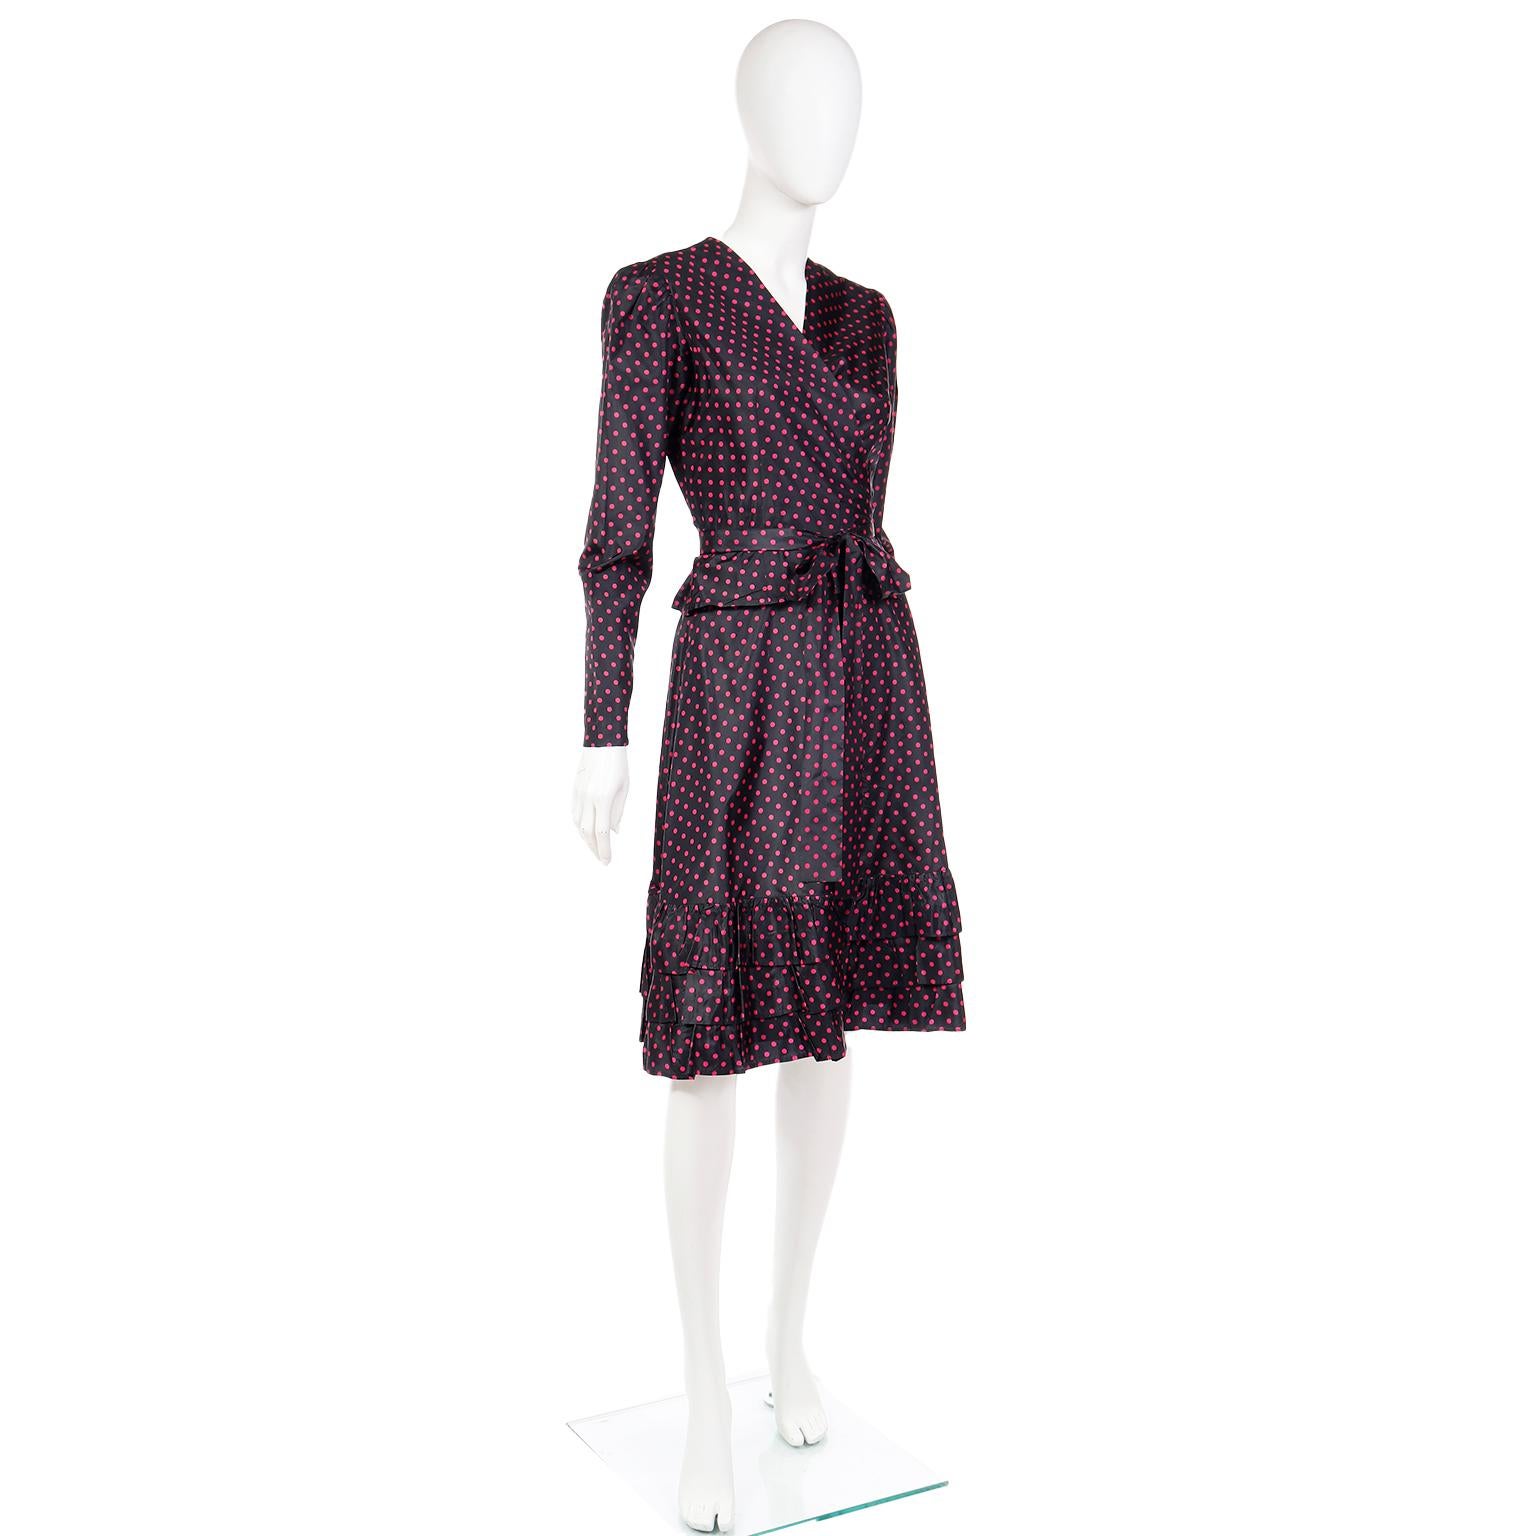 1970s Yves Saint Laurent Black 2pc Taffeta Dress w Pink Polka Dots w Skirt & Top In Good Condition For Sale In Portland, OR